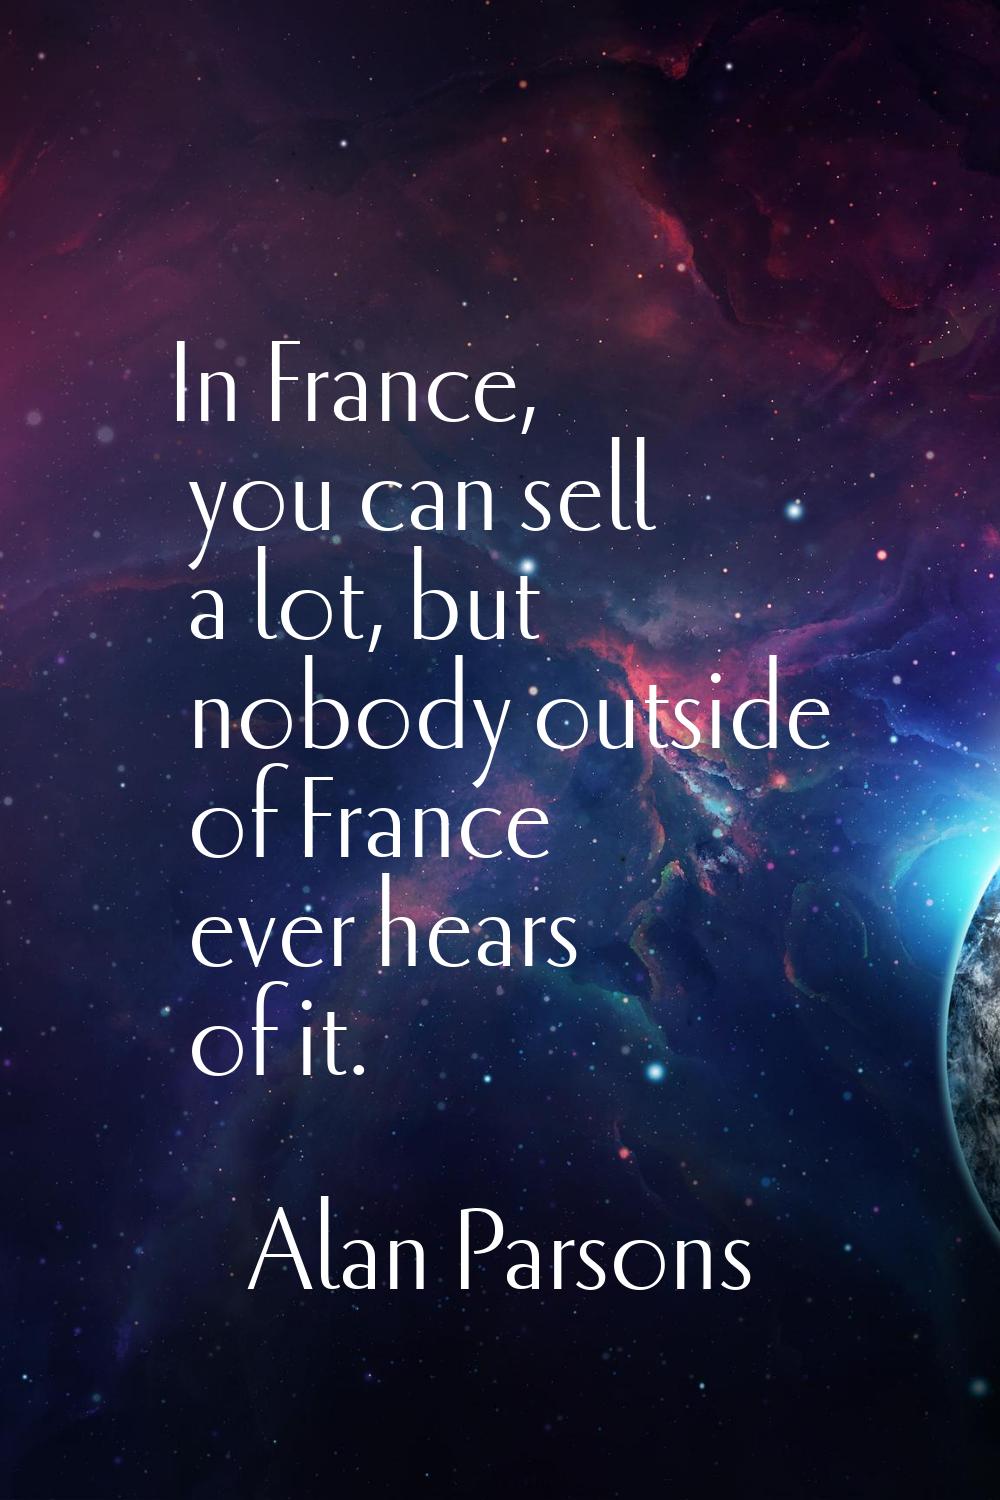 In France, you can sell a lot, but nobody outside of France ever hears of it.